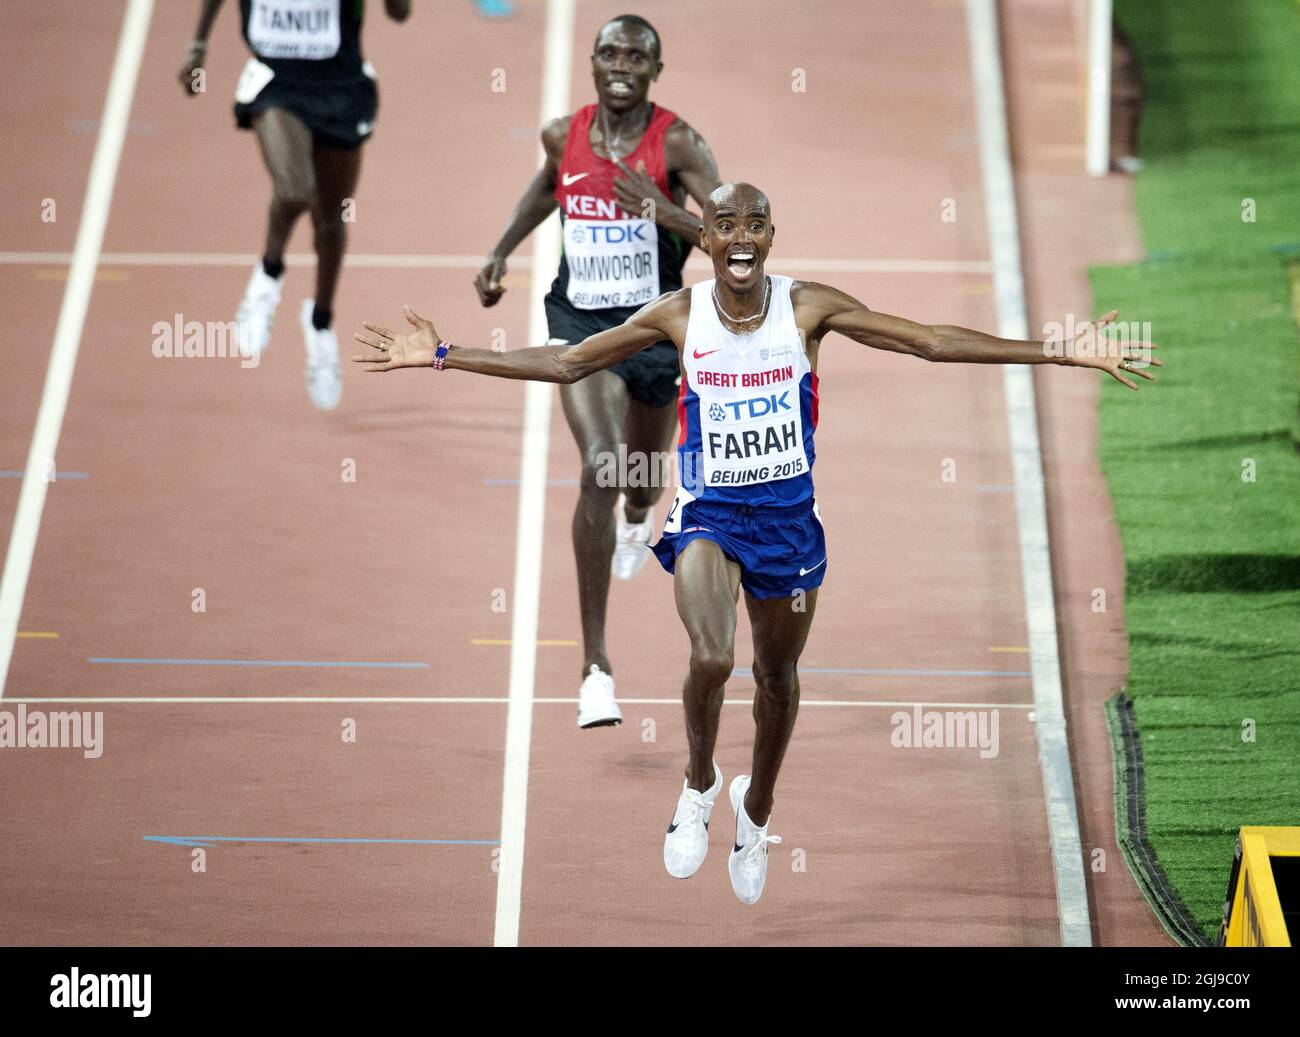 BEIJING 20150822 Mohamed Farah of Great Britain wins the men's 10000m final during the Beijing 2015 IAAF World Championships at the National Stadium in Beijing, China, August 22, 2015. Photo: Jessica Gow / TT / Kod 10070  Stock Photo